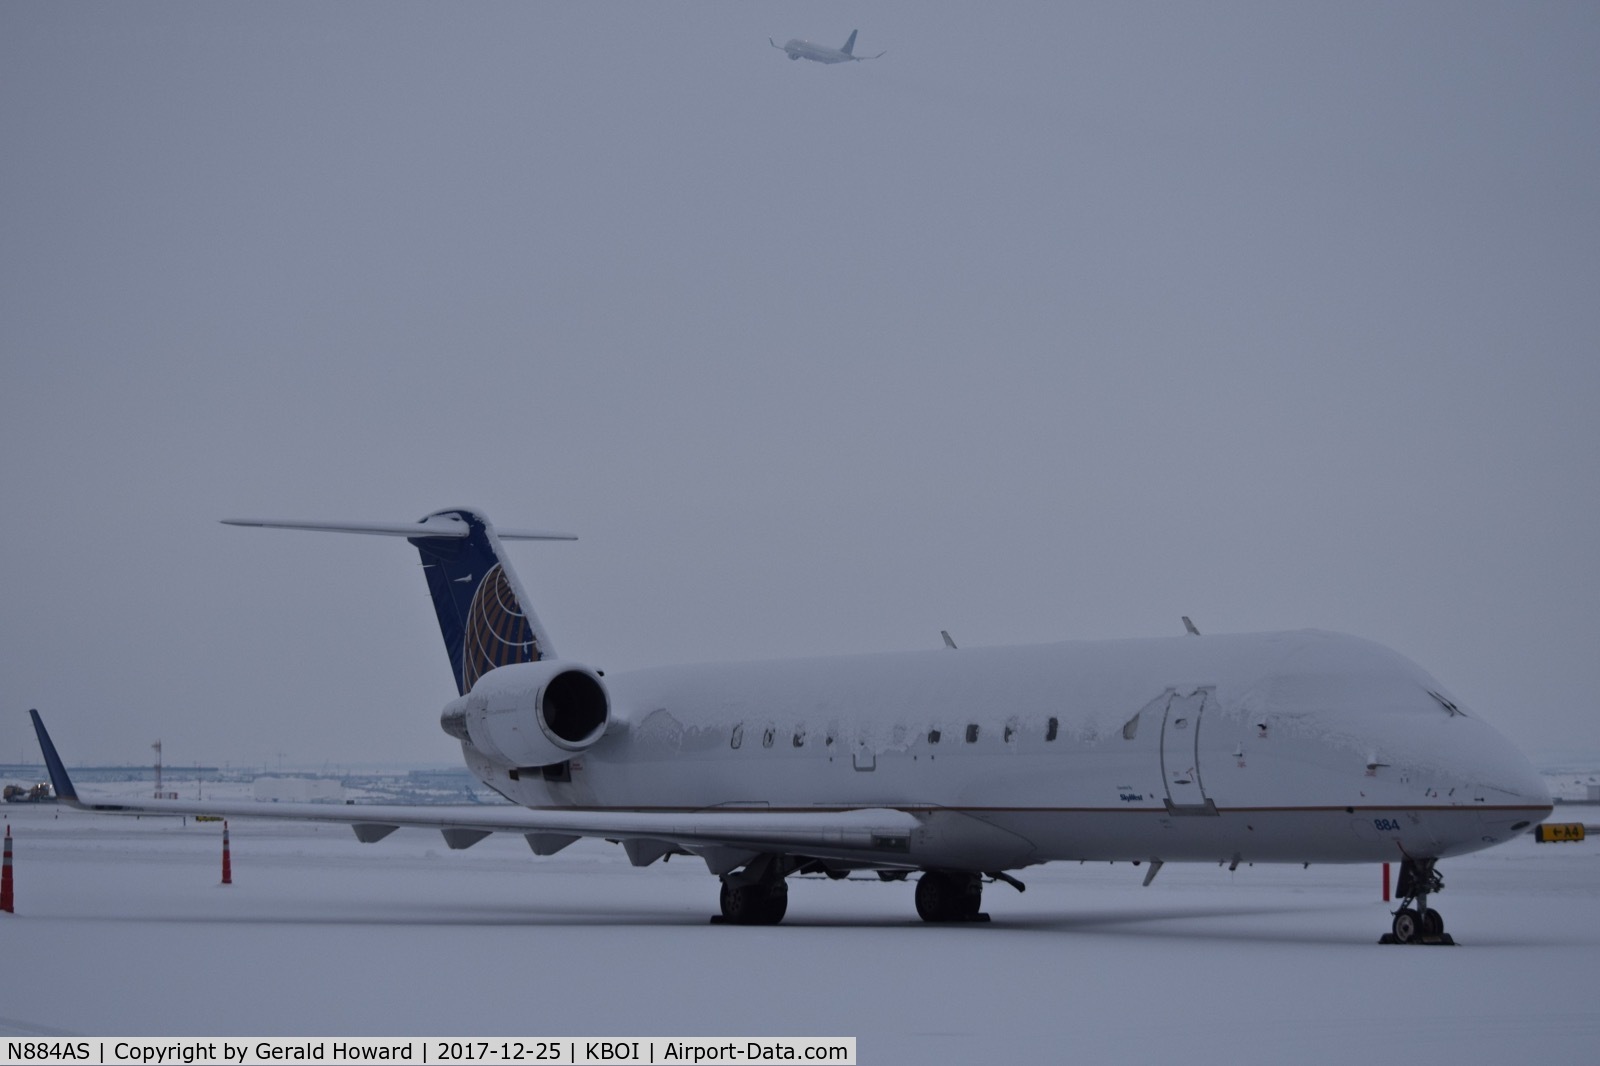 N884AS, 2001 Bombardier CRJ-200ER (CL-600-2B19) C/N 7513, Parked on a remote spot awaiting it'd call to duty.